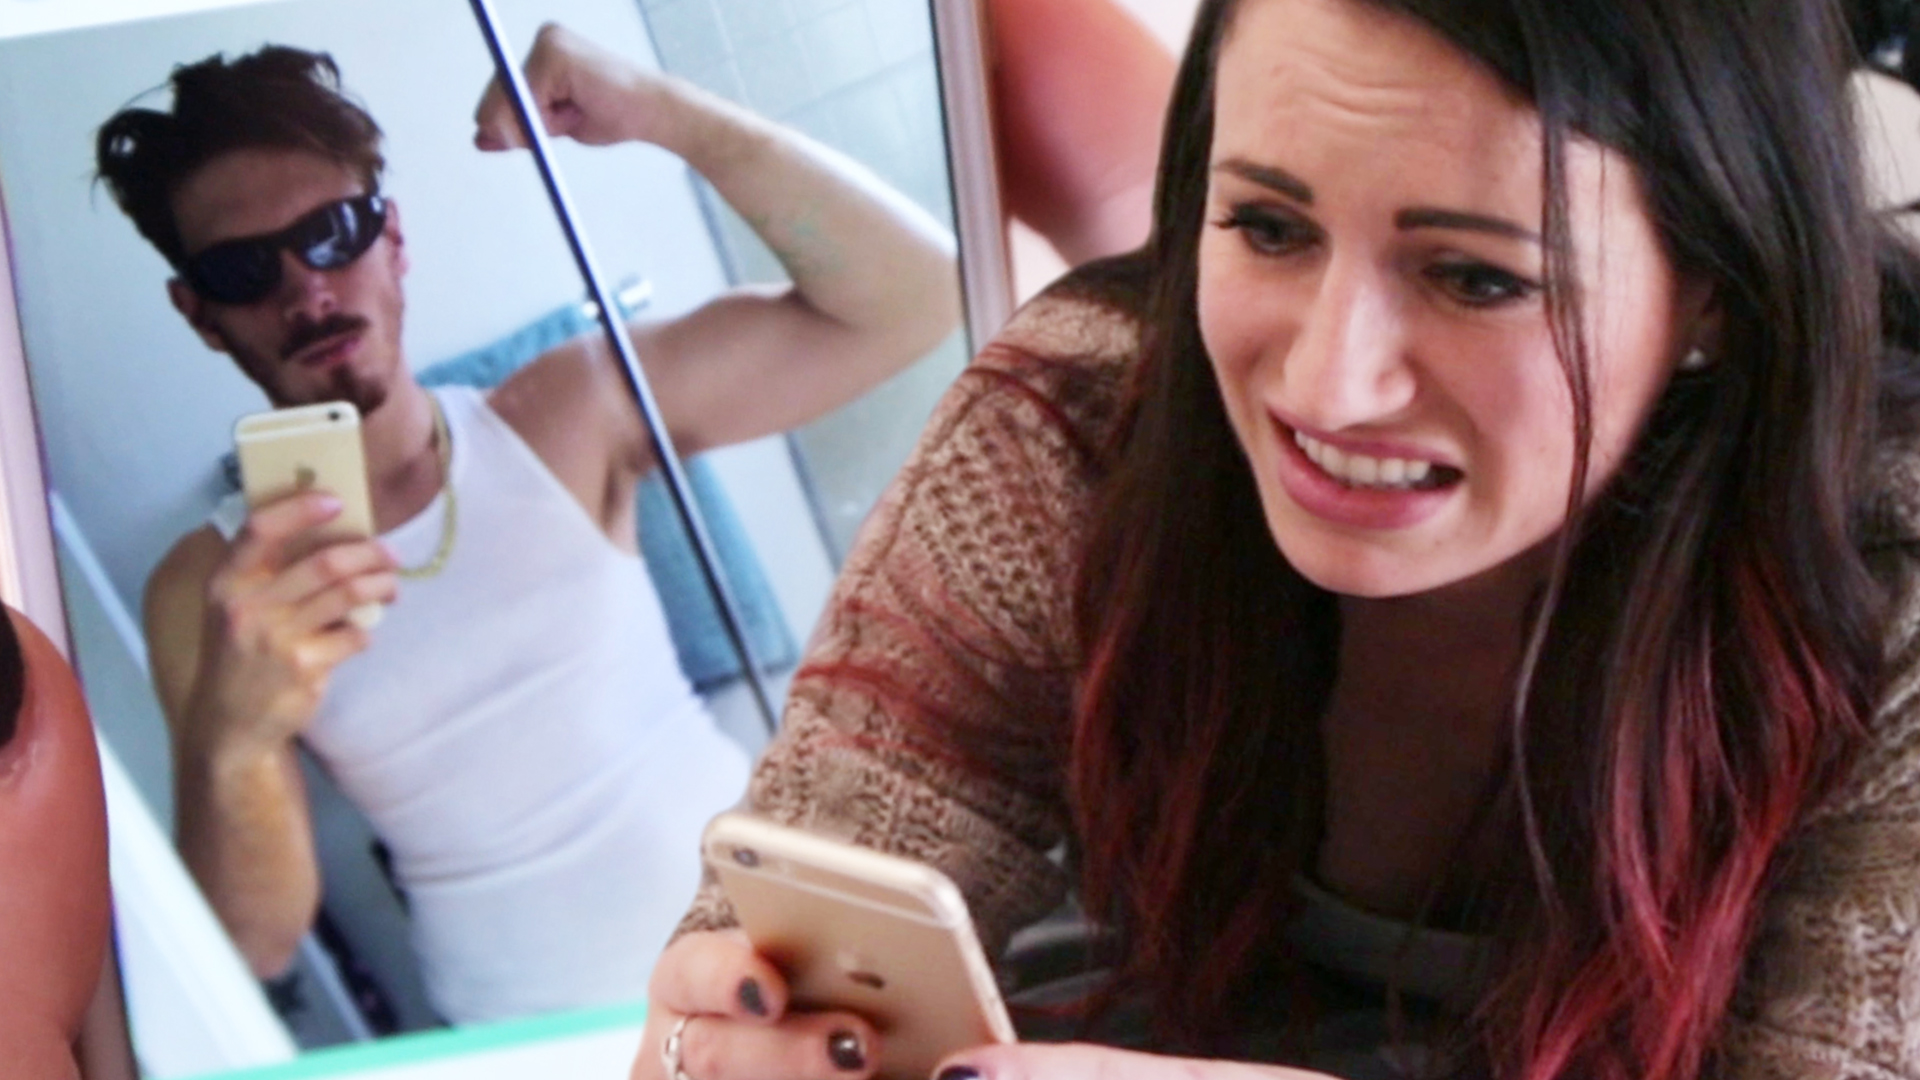 Watch: When You Accidentally Swipe Right.